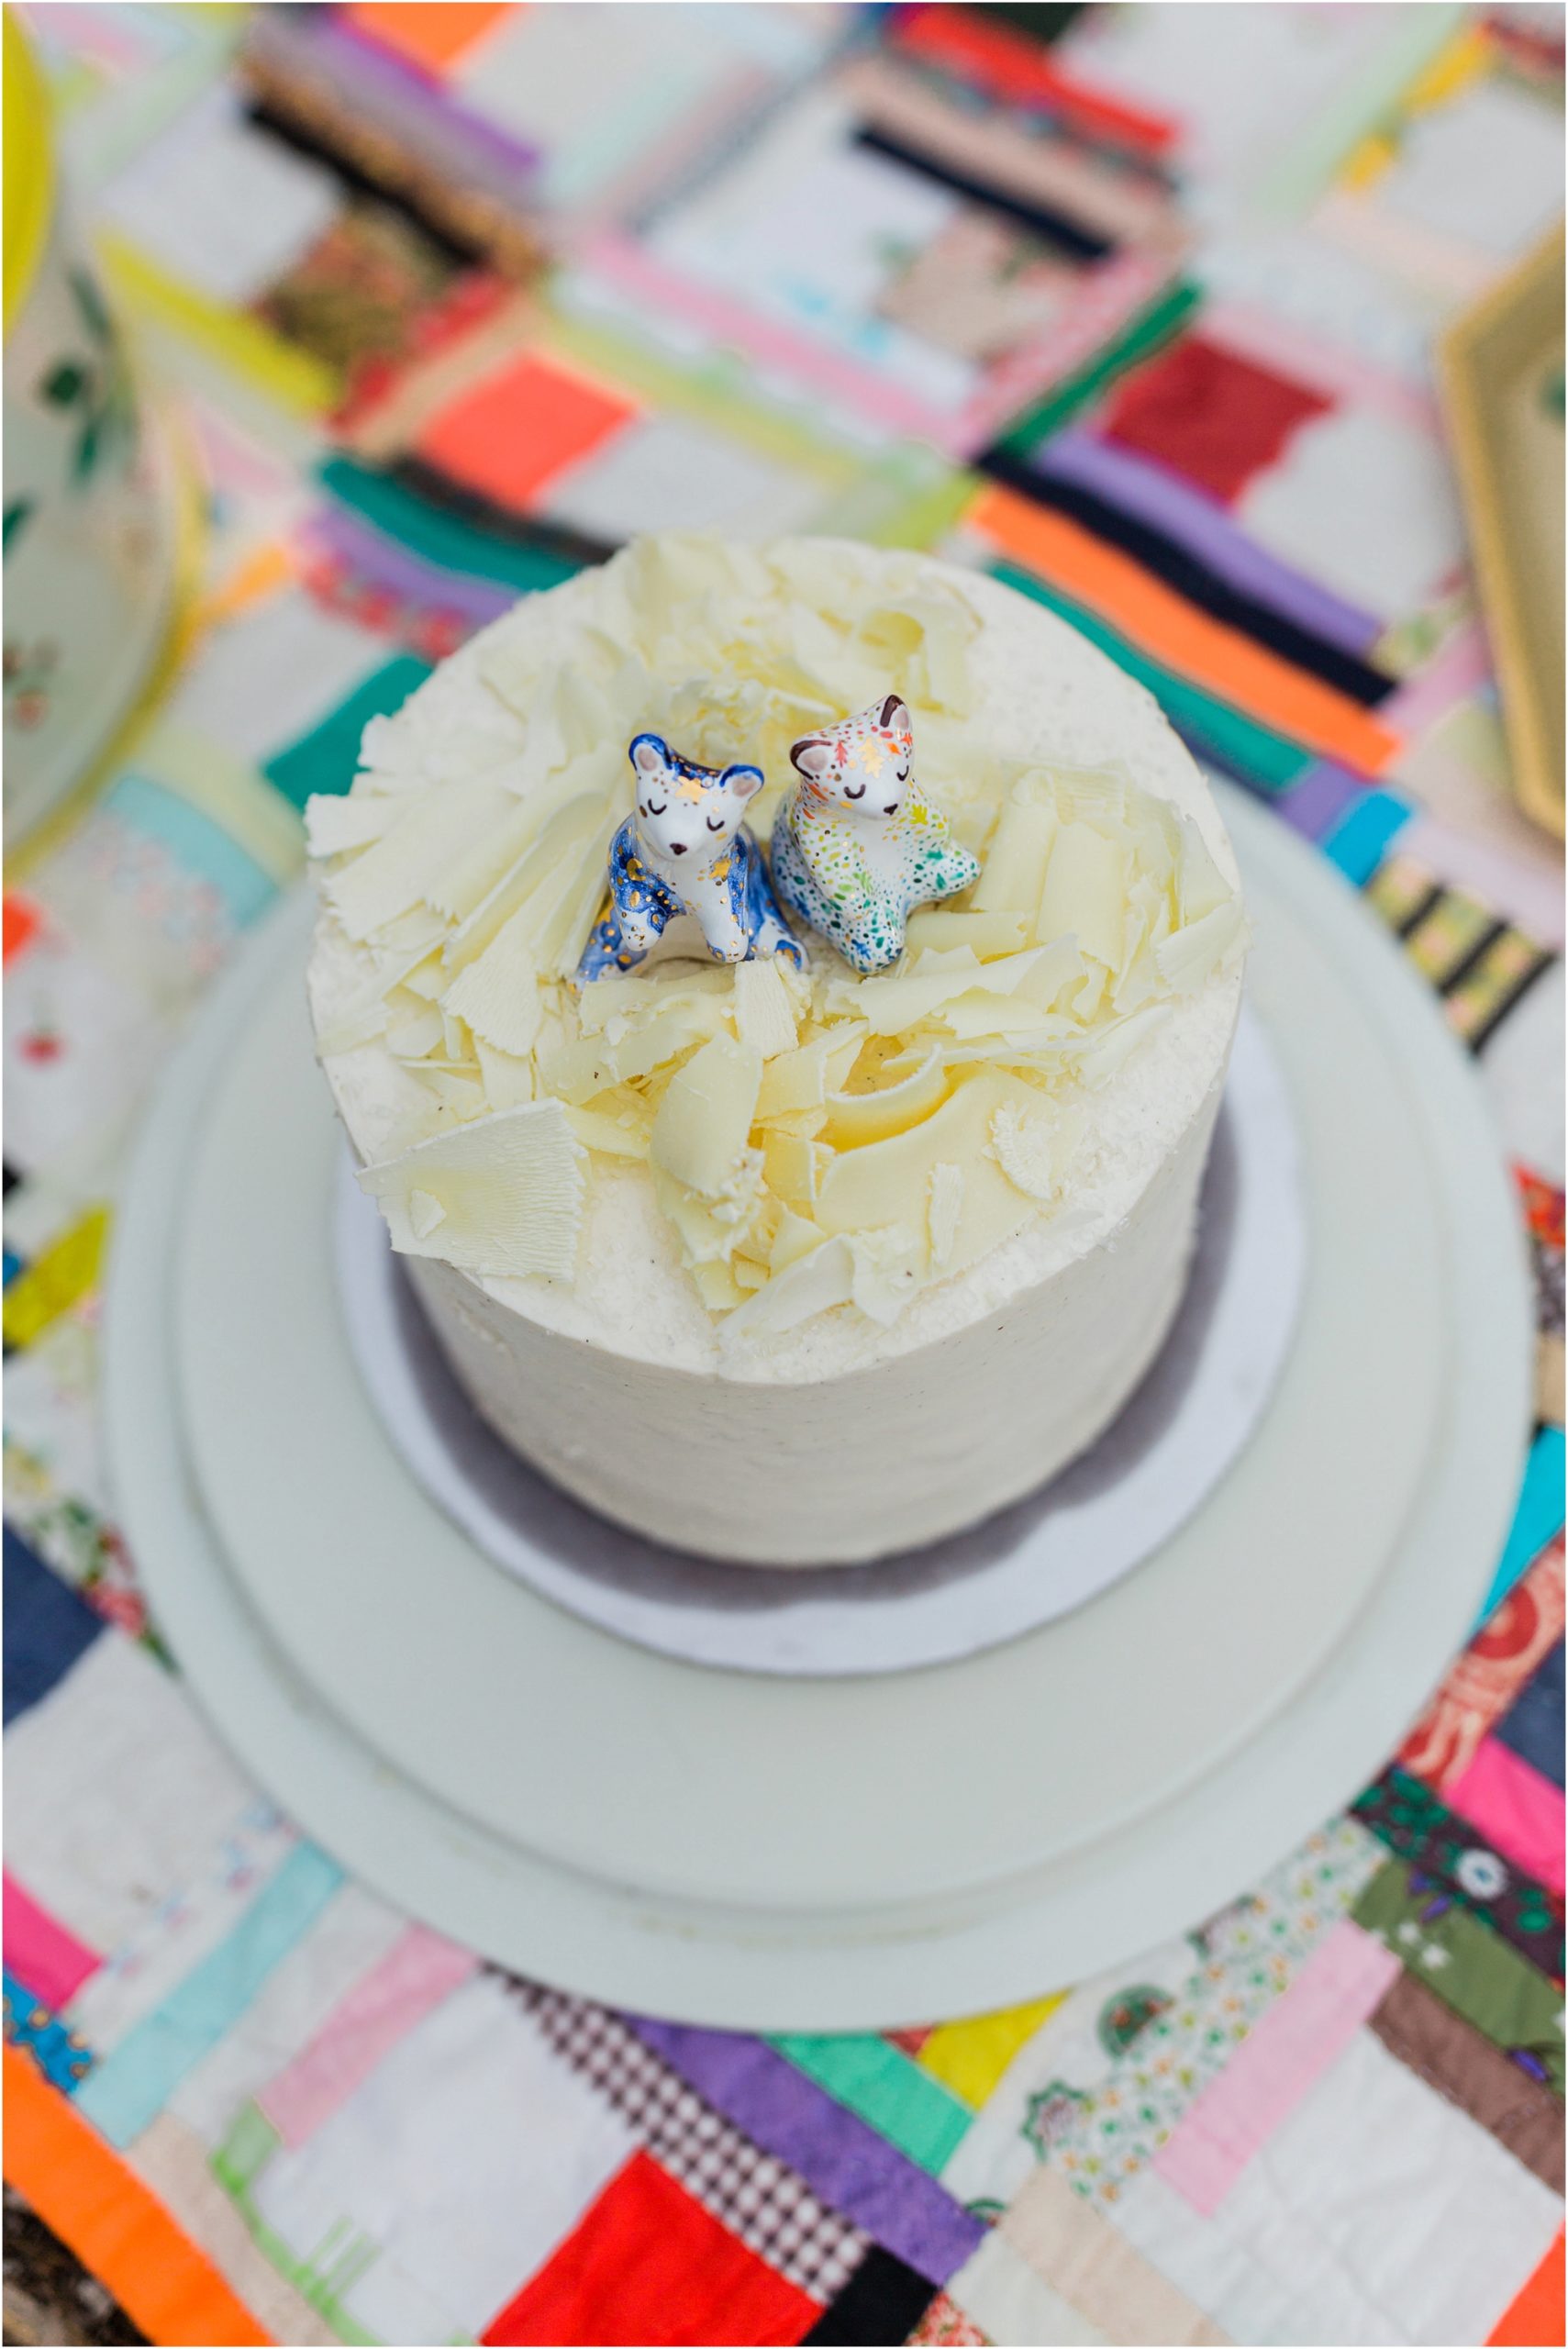 A delicious foxtail bakeshop cake with adorable hand painted figure toppers in all colors of the rainbow for an Oregon elopement at Crater Lake National Park. | Erica Swantek Photography